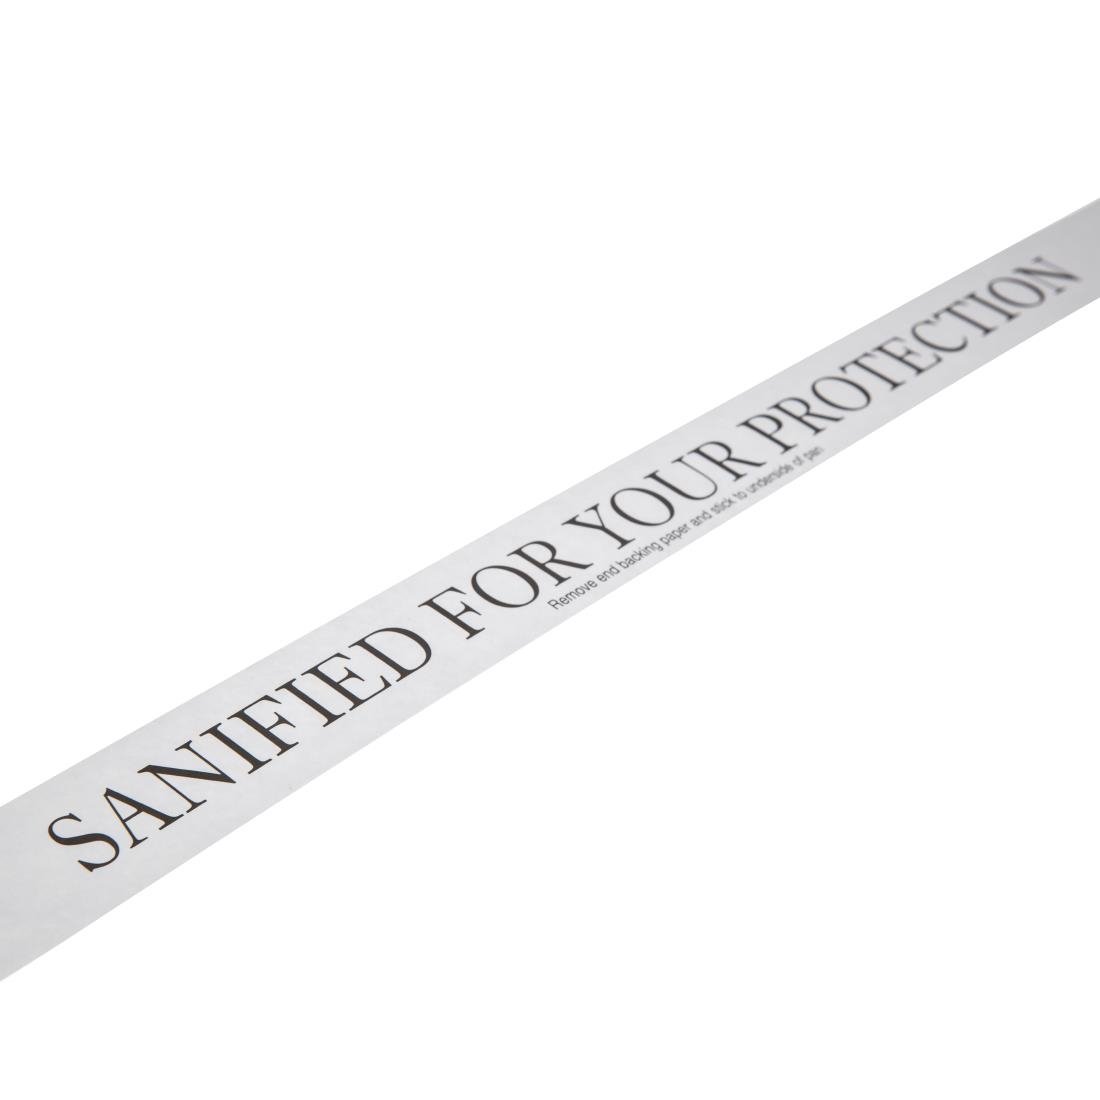 Sanified for your protection stickers (250 stuks)